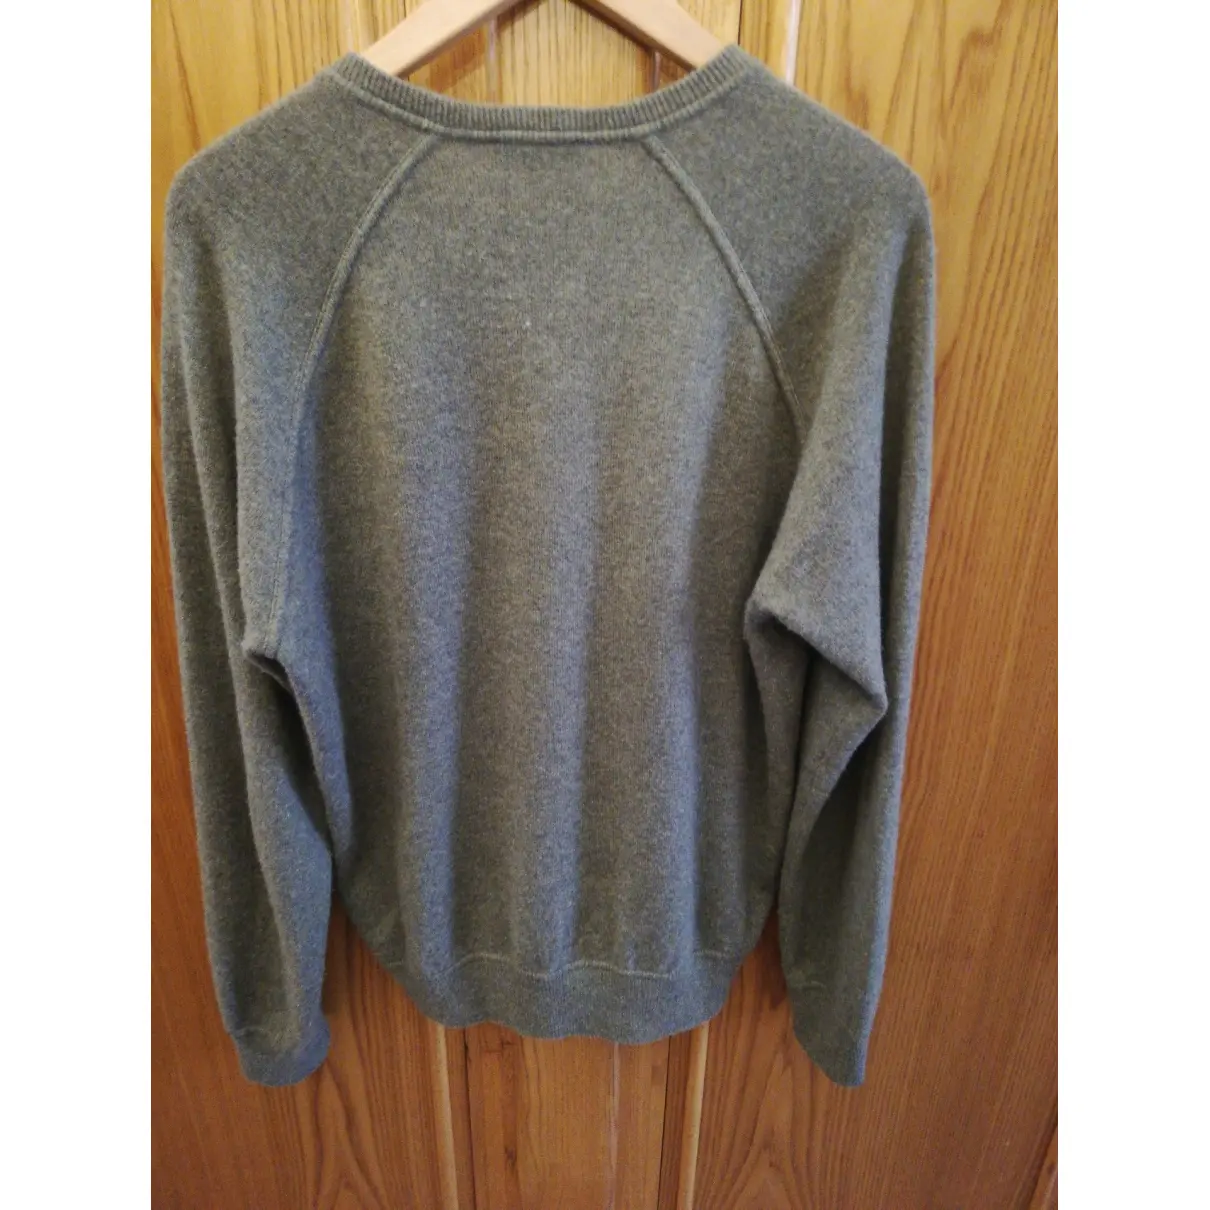 Buy Barba Cashmere pull online